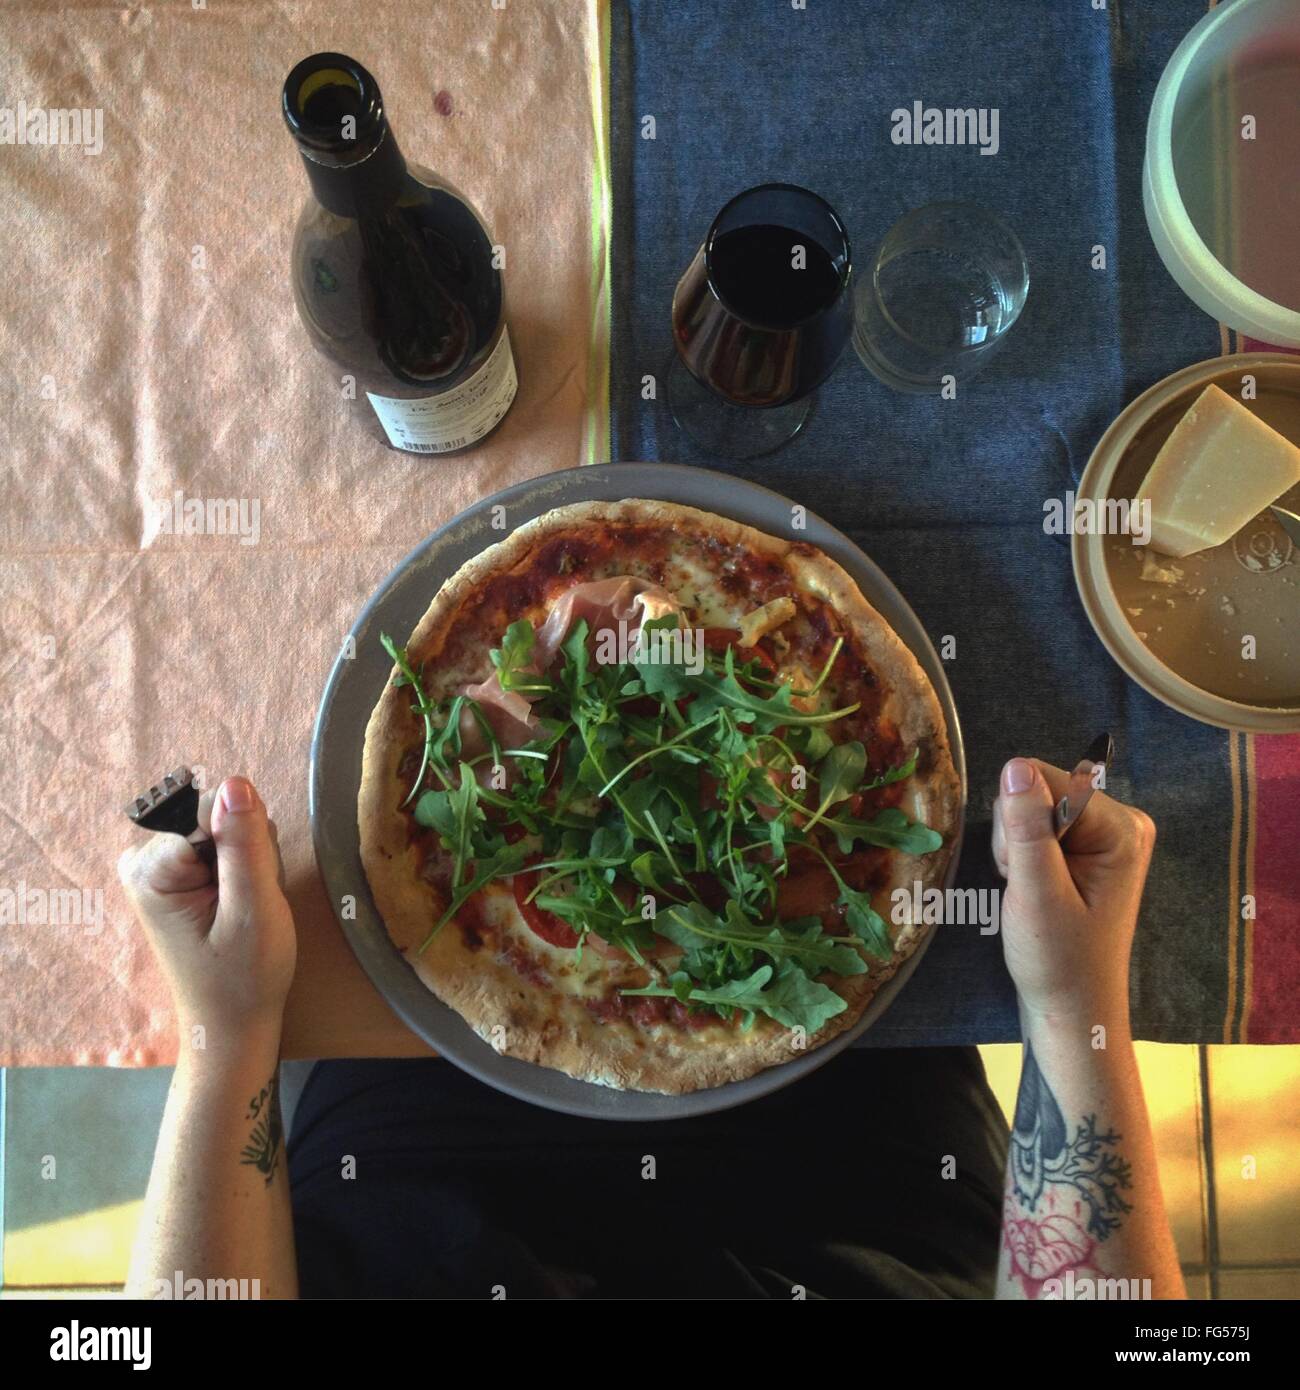 Cropped Image Of Hand With Pizza And Wine On Table Stock Photo